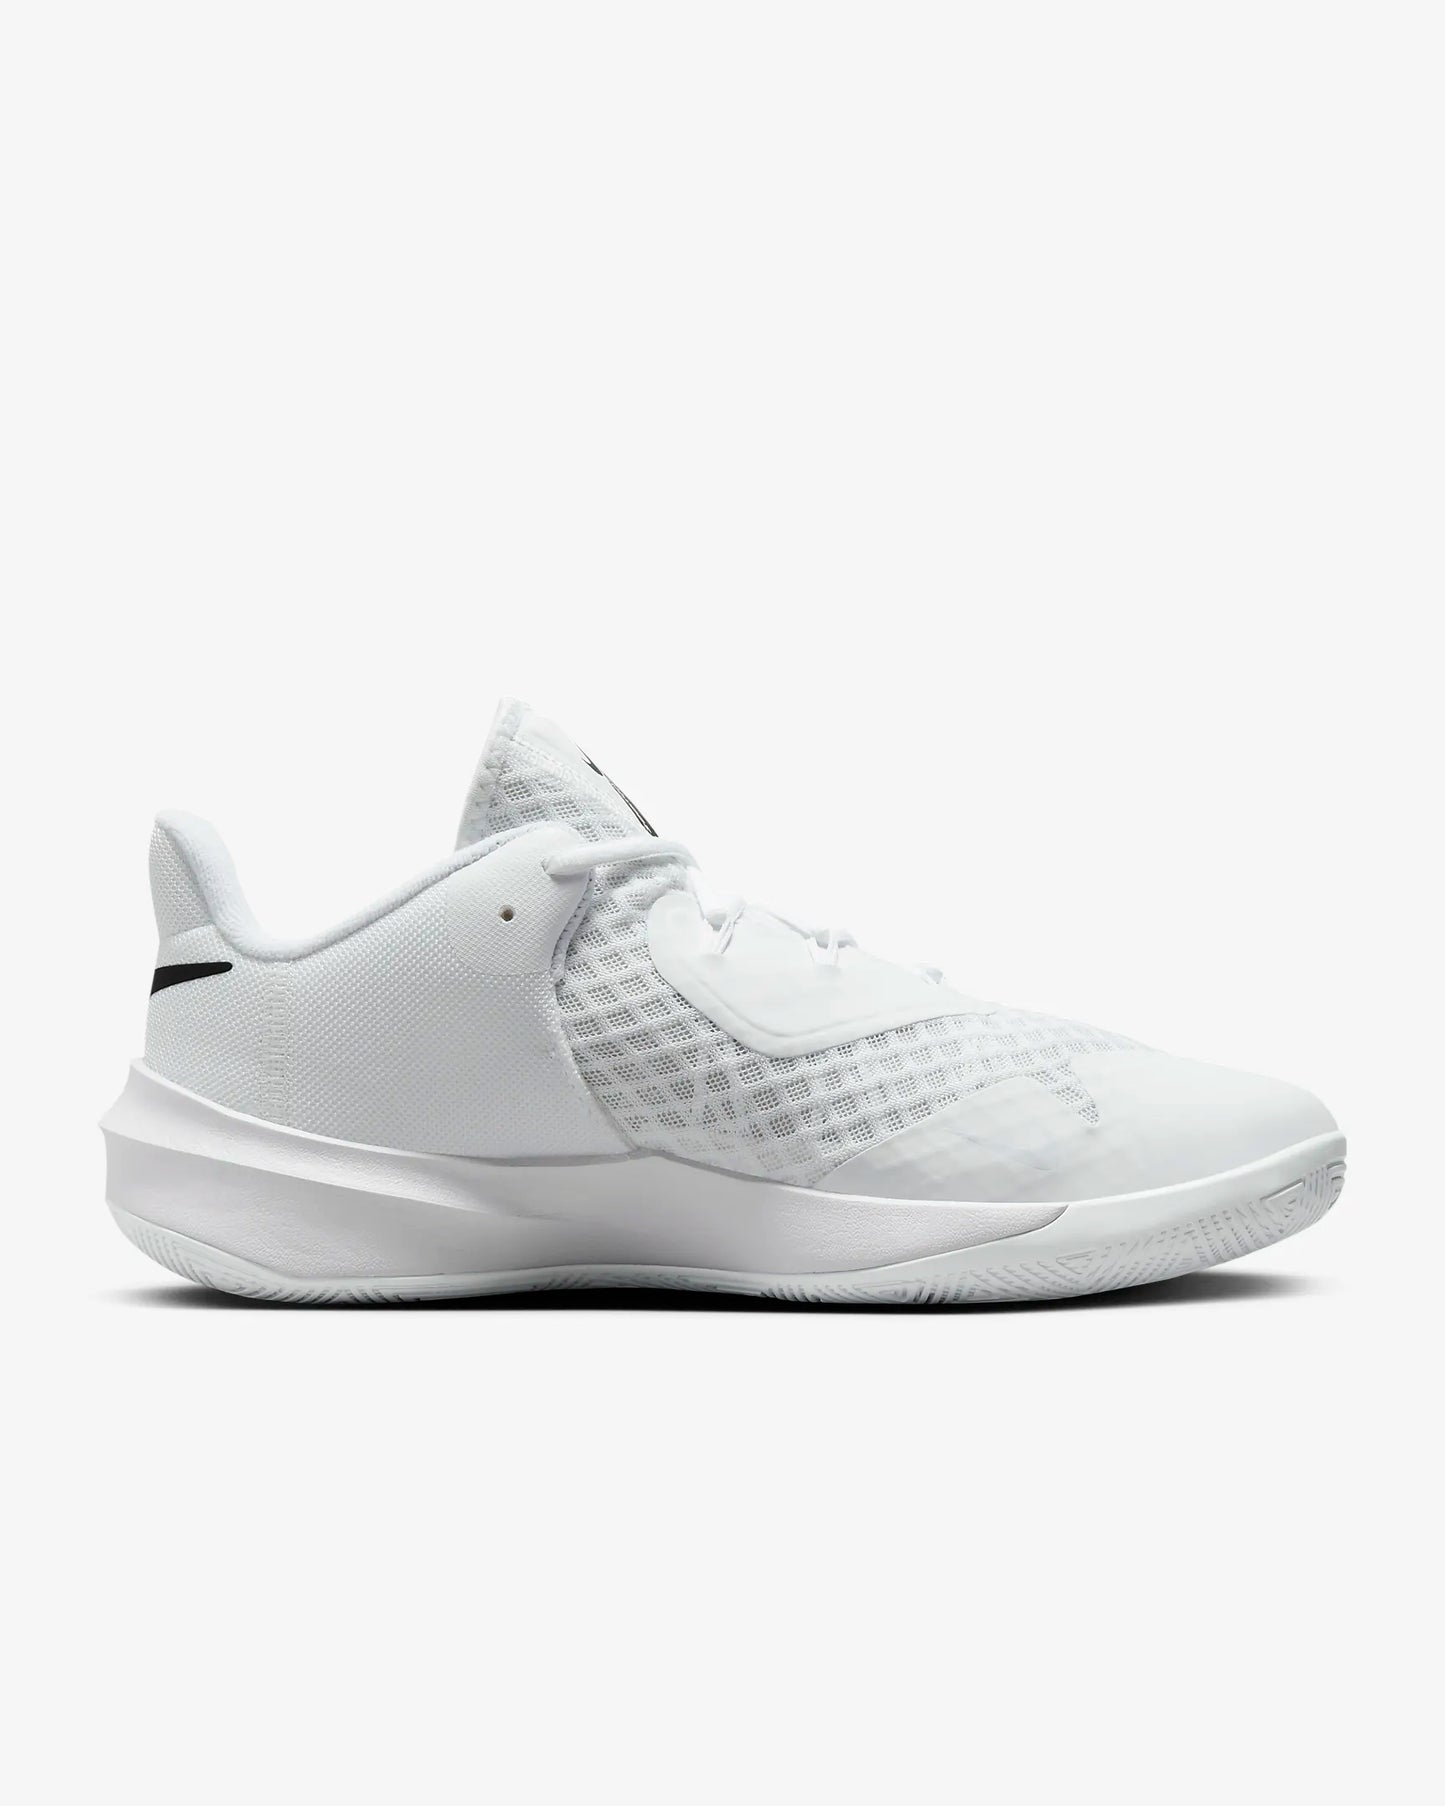 Nike Zoom Hyperspeed court Shoes (White)